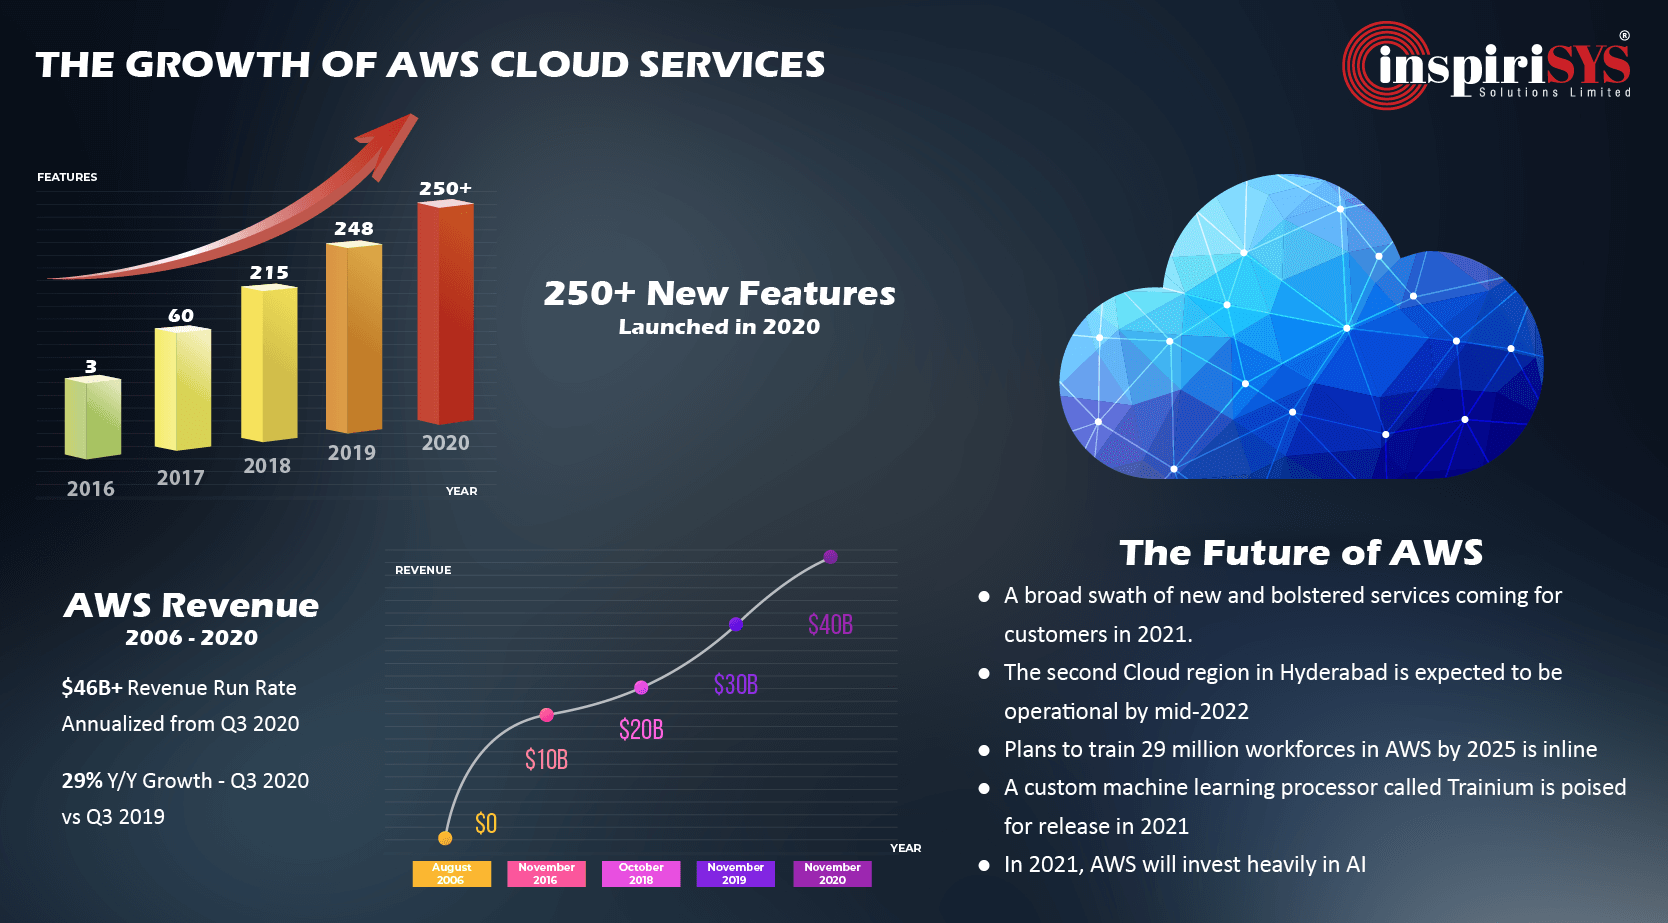 The Growth of AWS Cloud Services - Features, Revenue and Predictions